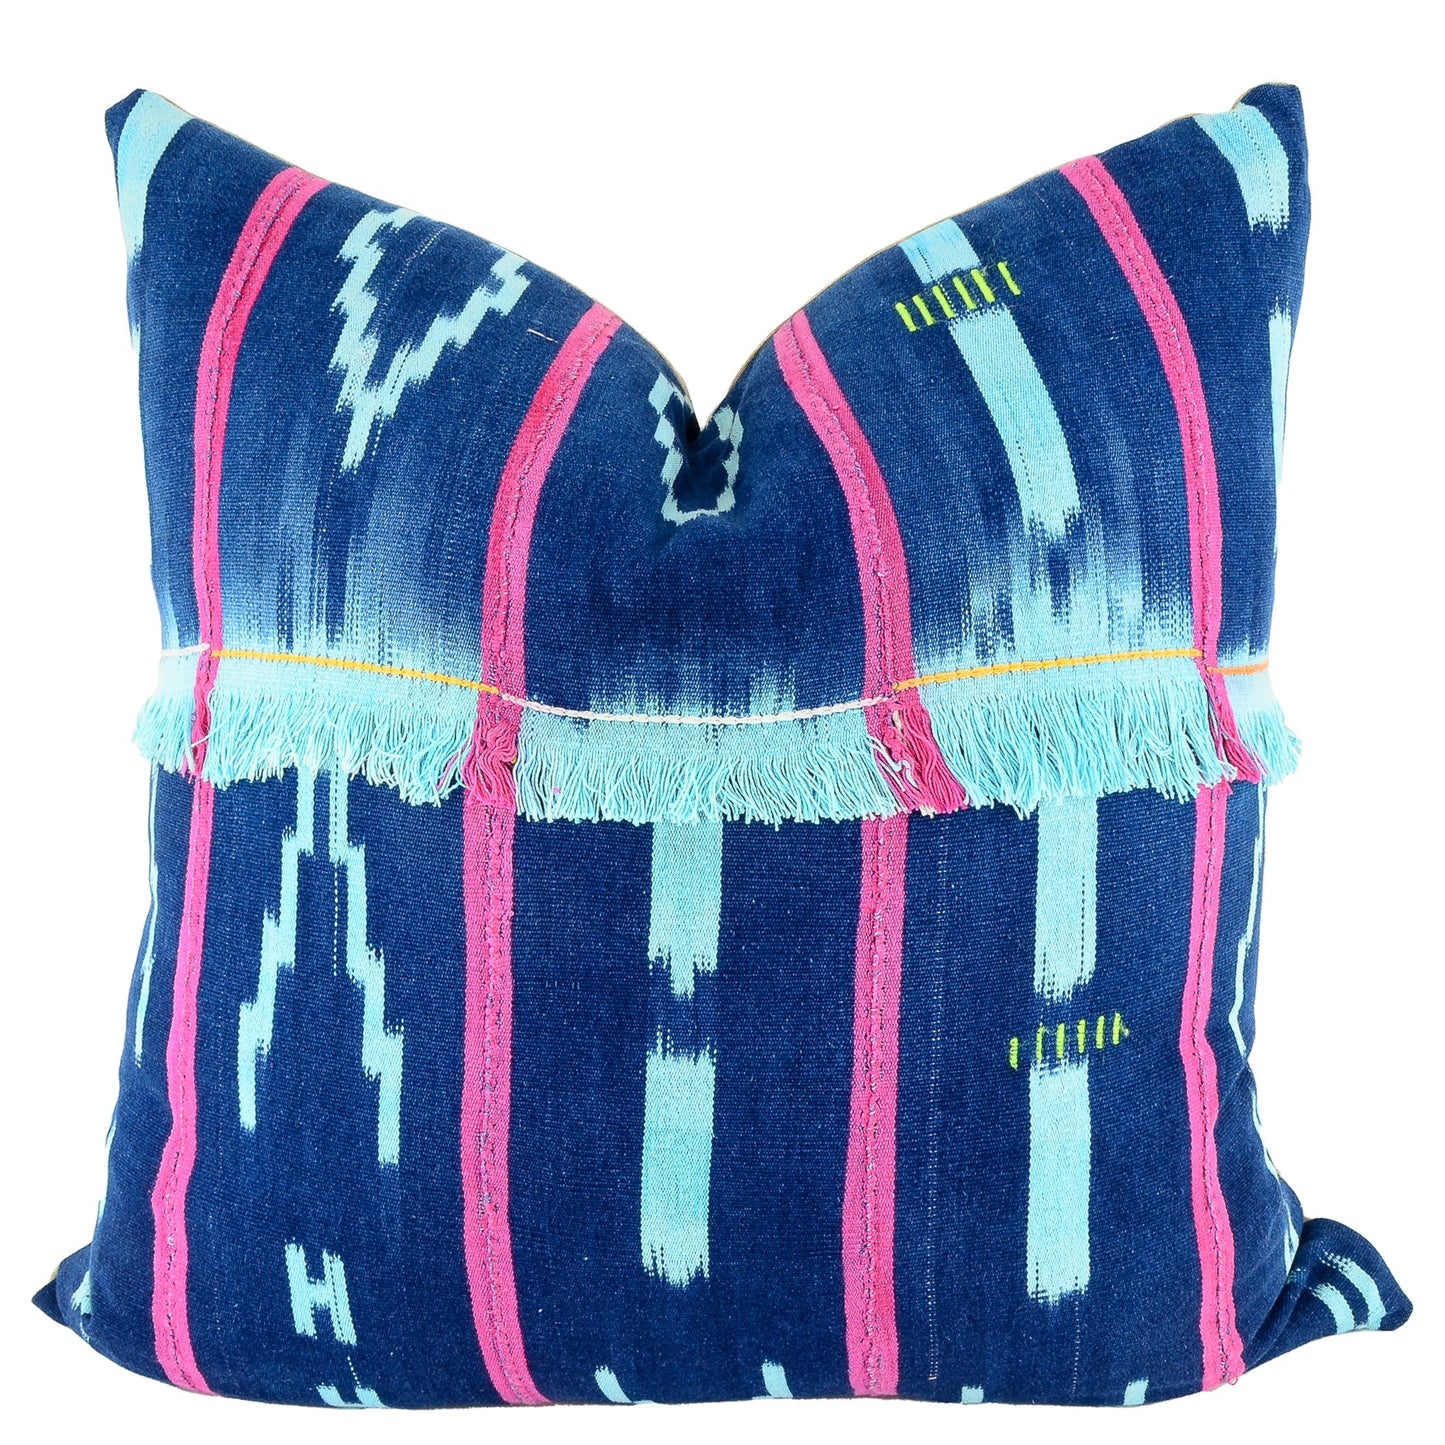 Front of pillow with rich blue patterns, red stripes and blue fringe made from vintage handwoven Baoulé/Baule cotton cloth from Africa's Ivory Coast, reflecting the traditions, symbols, and tribal lives of the Baoulé/Baule people